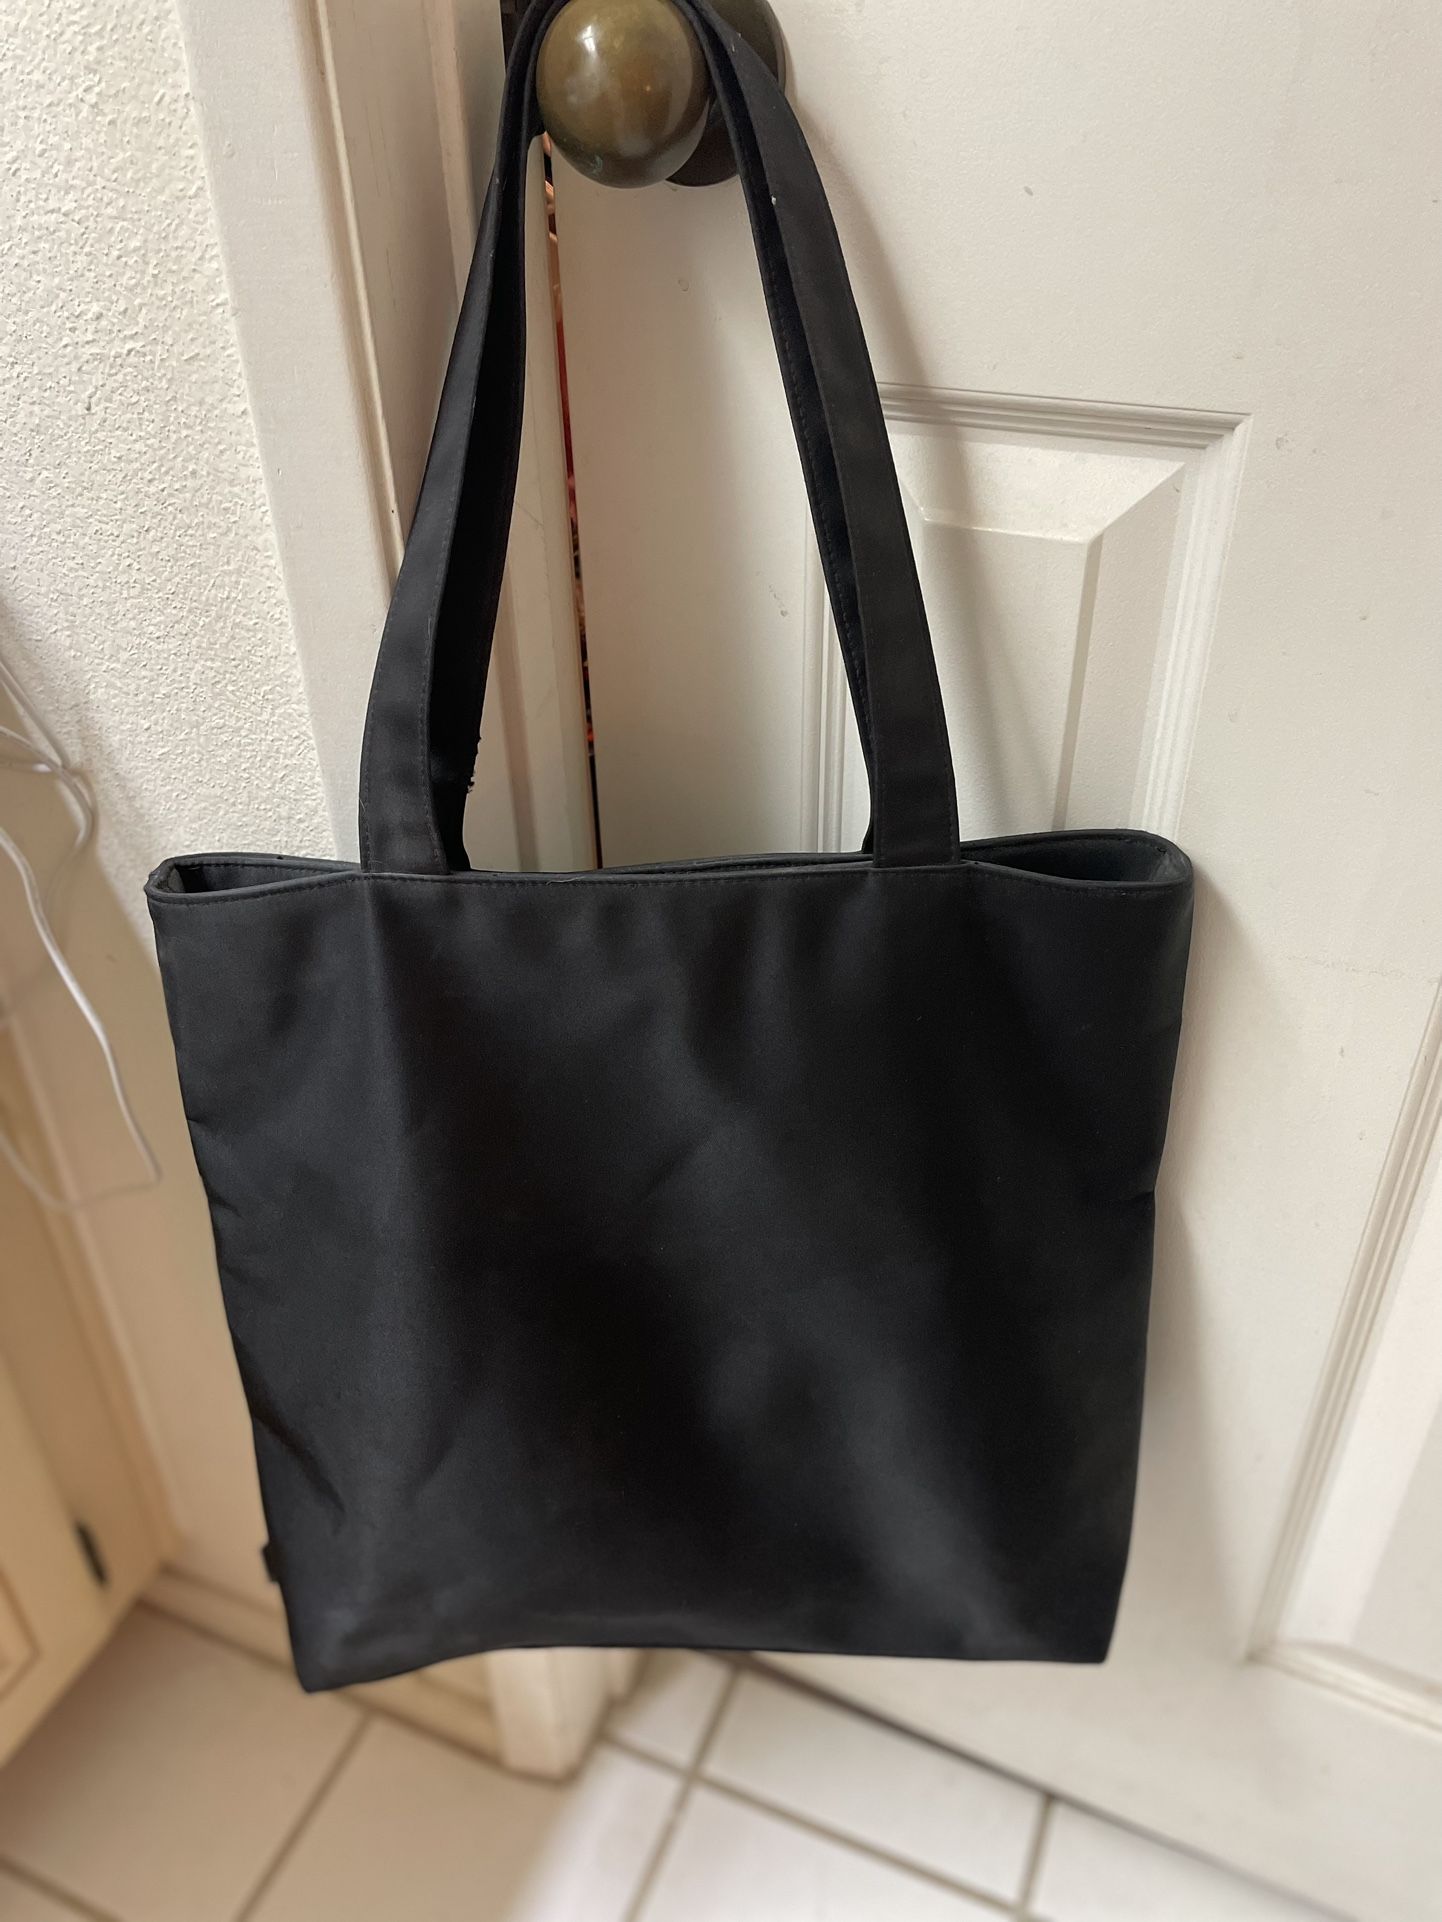 Calvin Klein Mini Bag for Sale in Los Angeles, CA - OfferUp